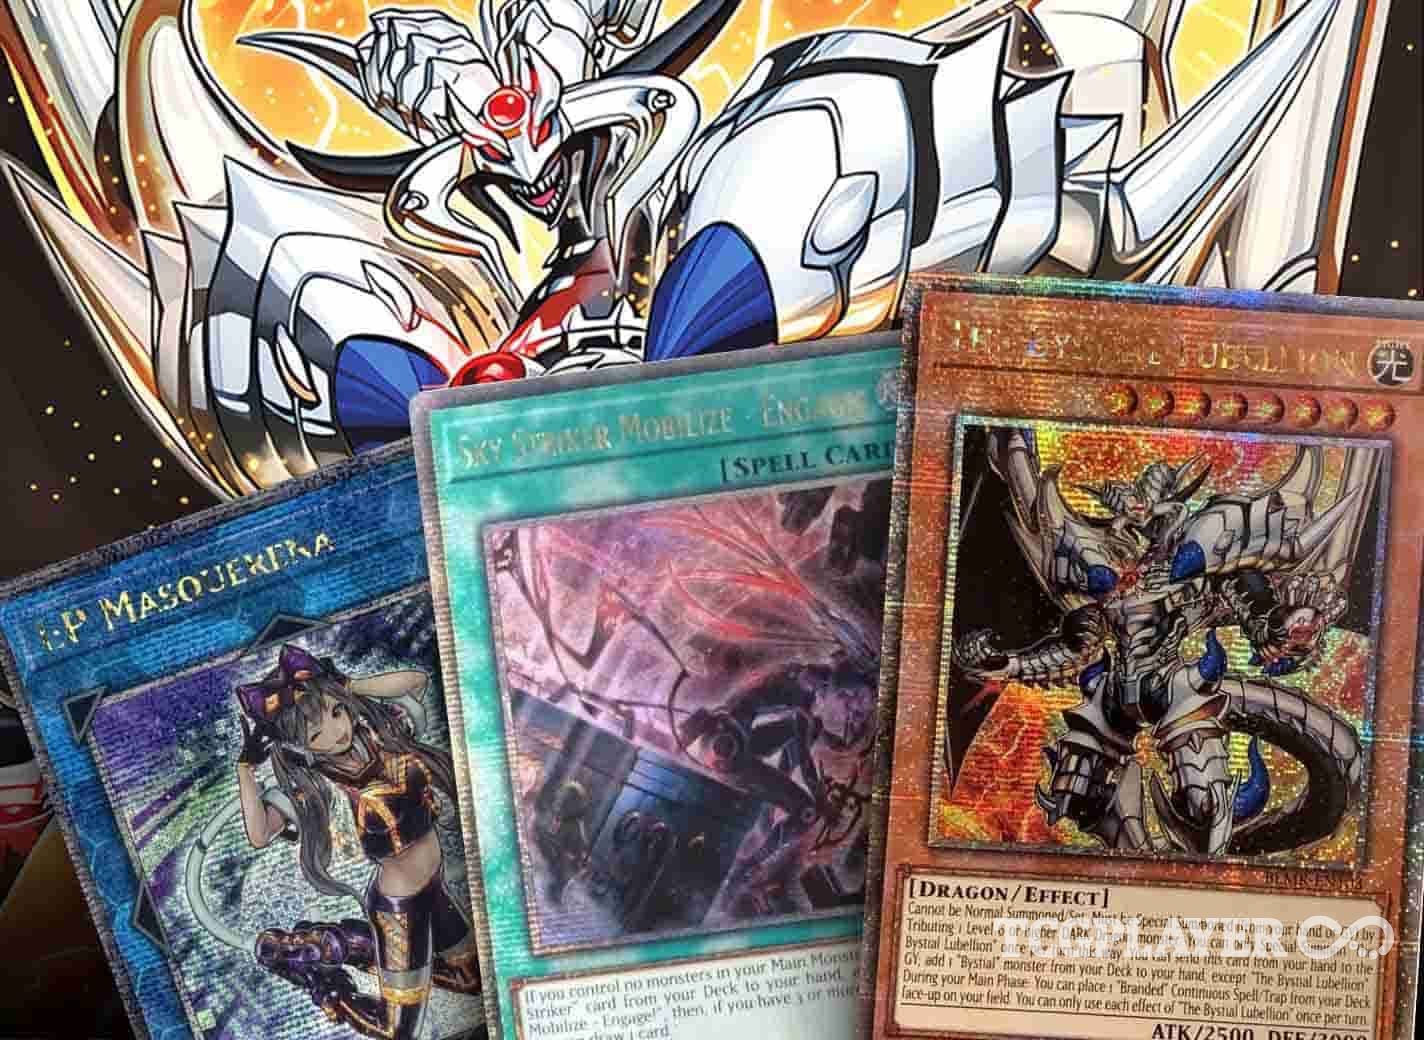 Thunder Crash - Yu-Gi-Oh Cards - Out of Games